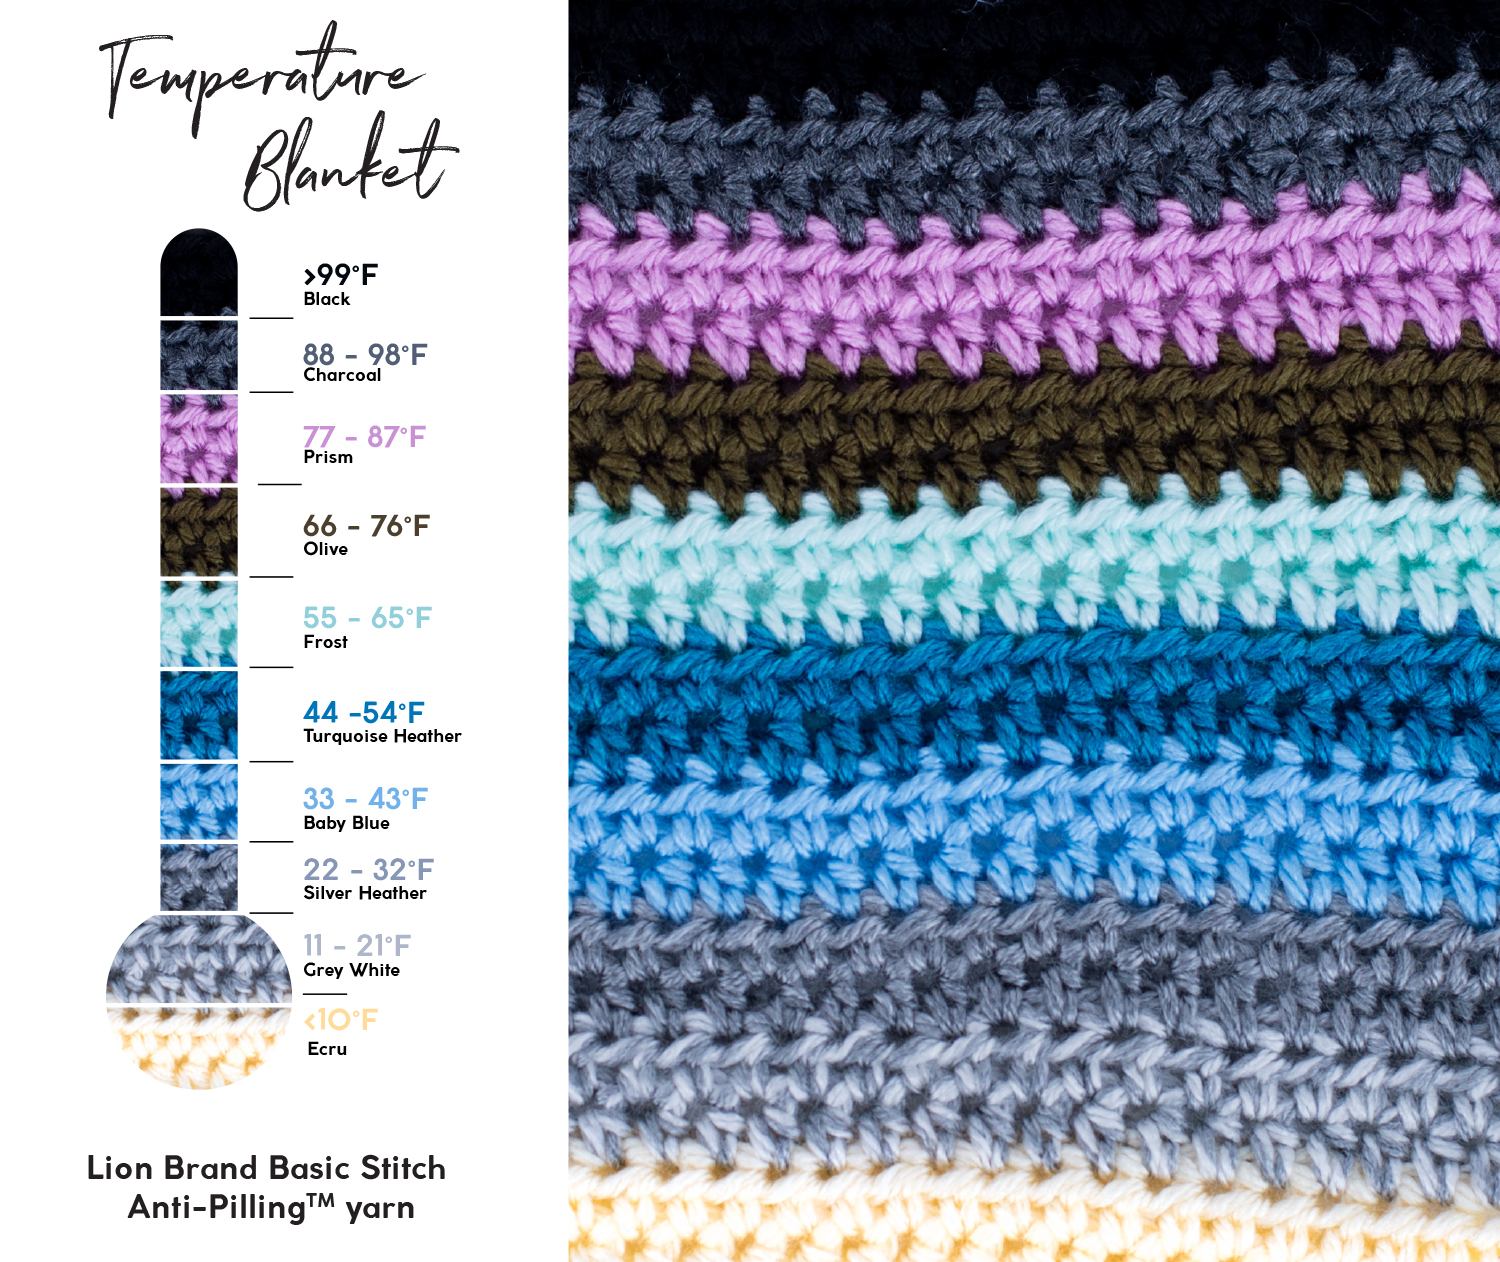 A Year In Yarn: How To Knit or Crochet A Temperature Blanket | Lion Brand  Notebook